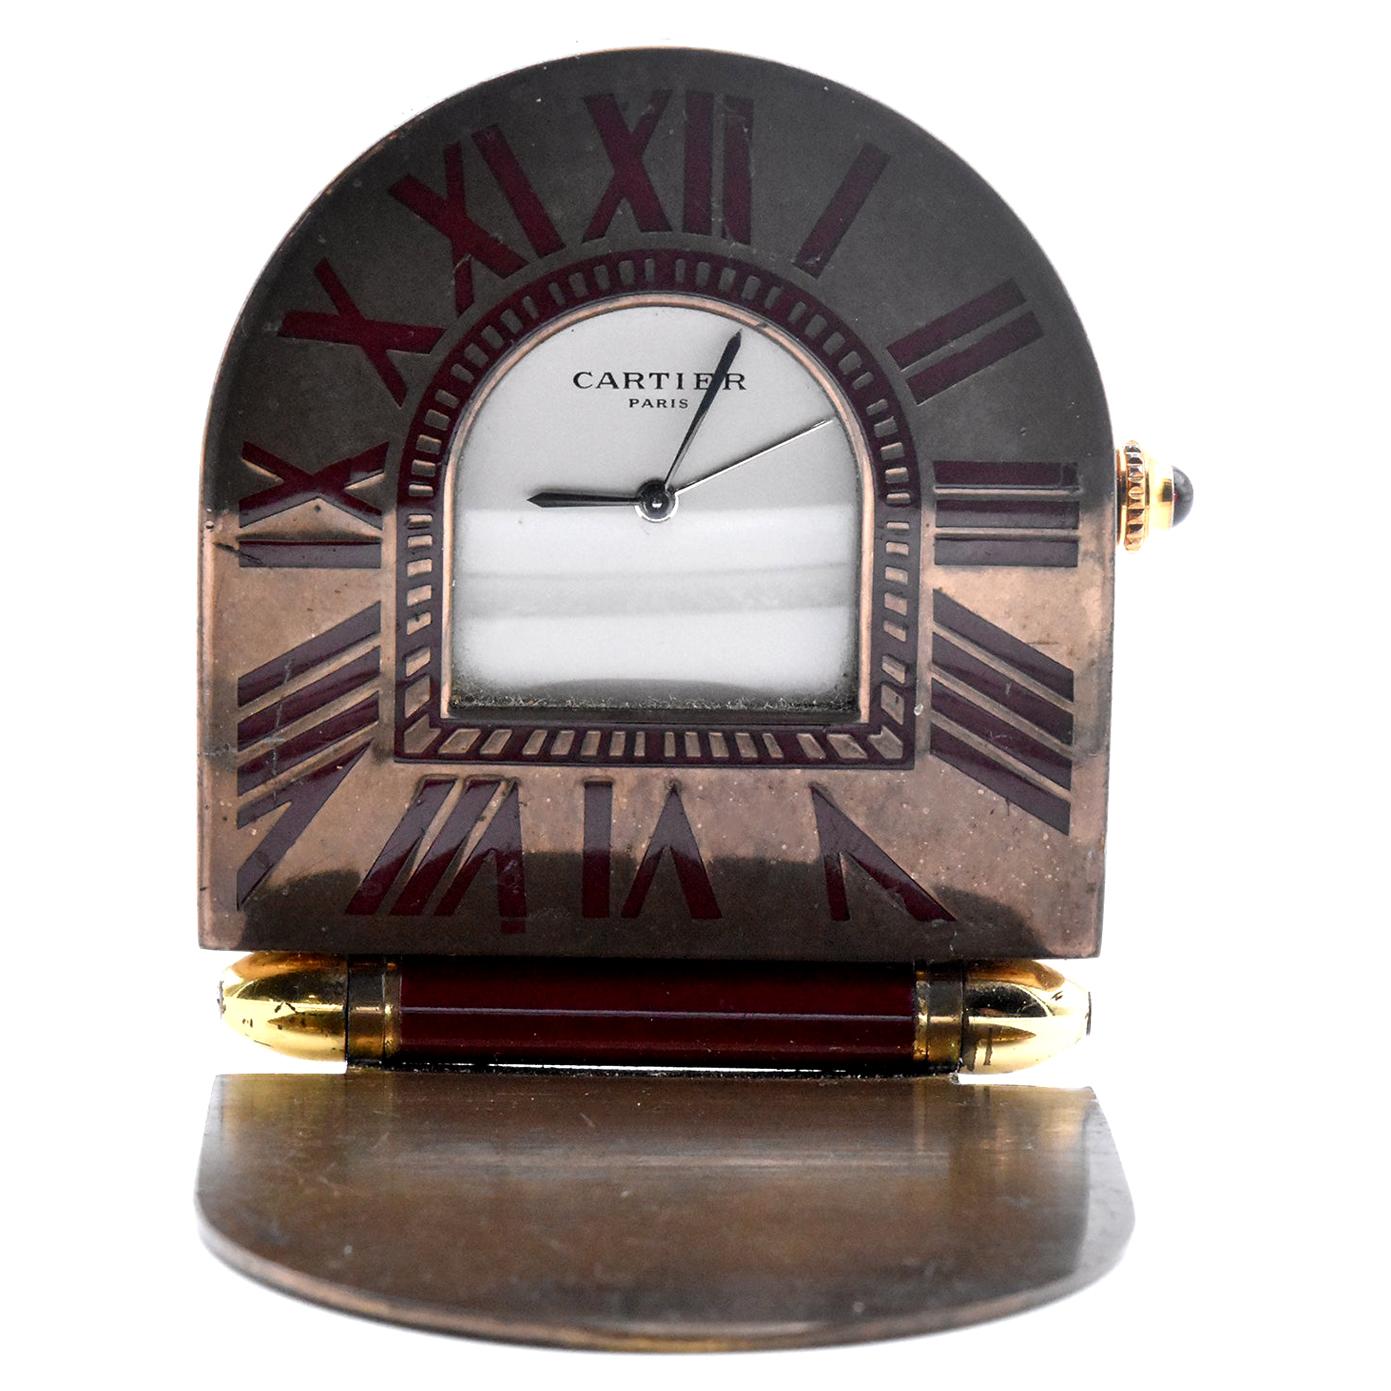 Cartier Brass Travel Alarm Clock with Red Roman Numerals